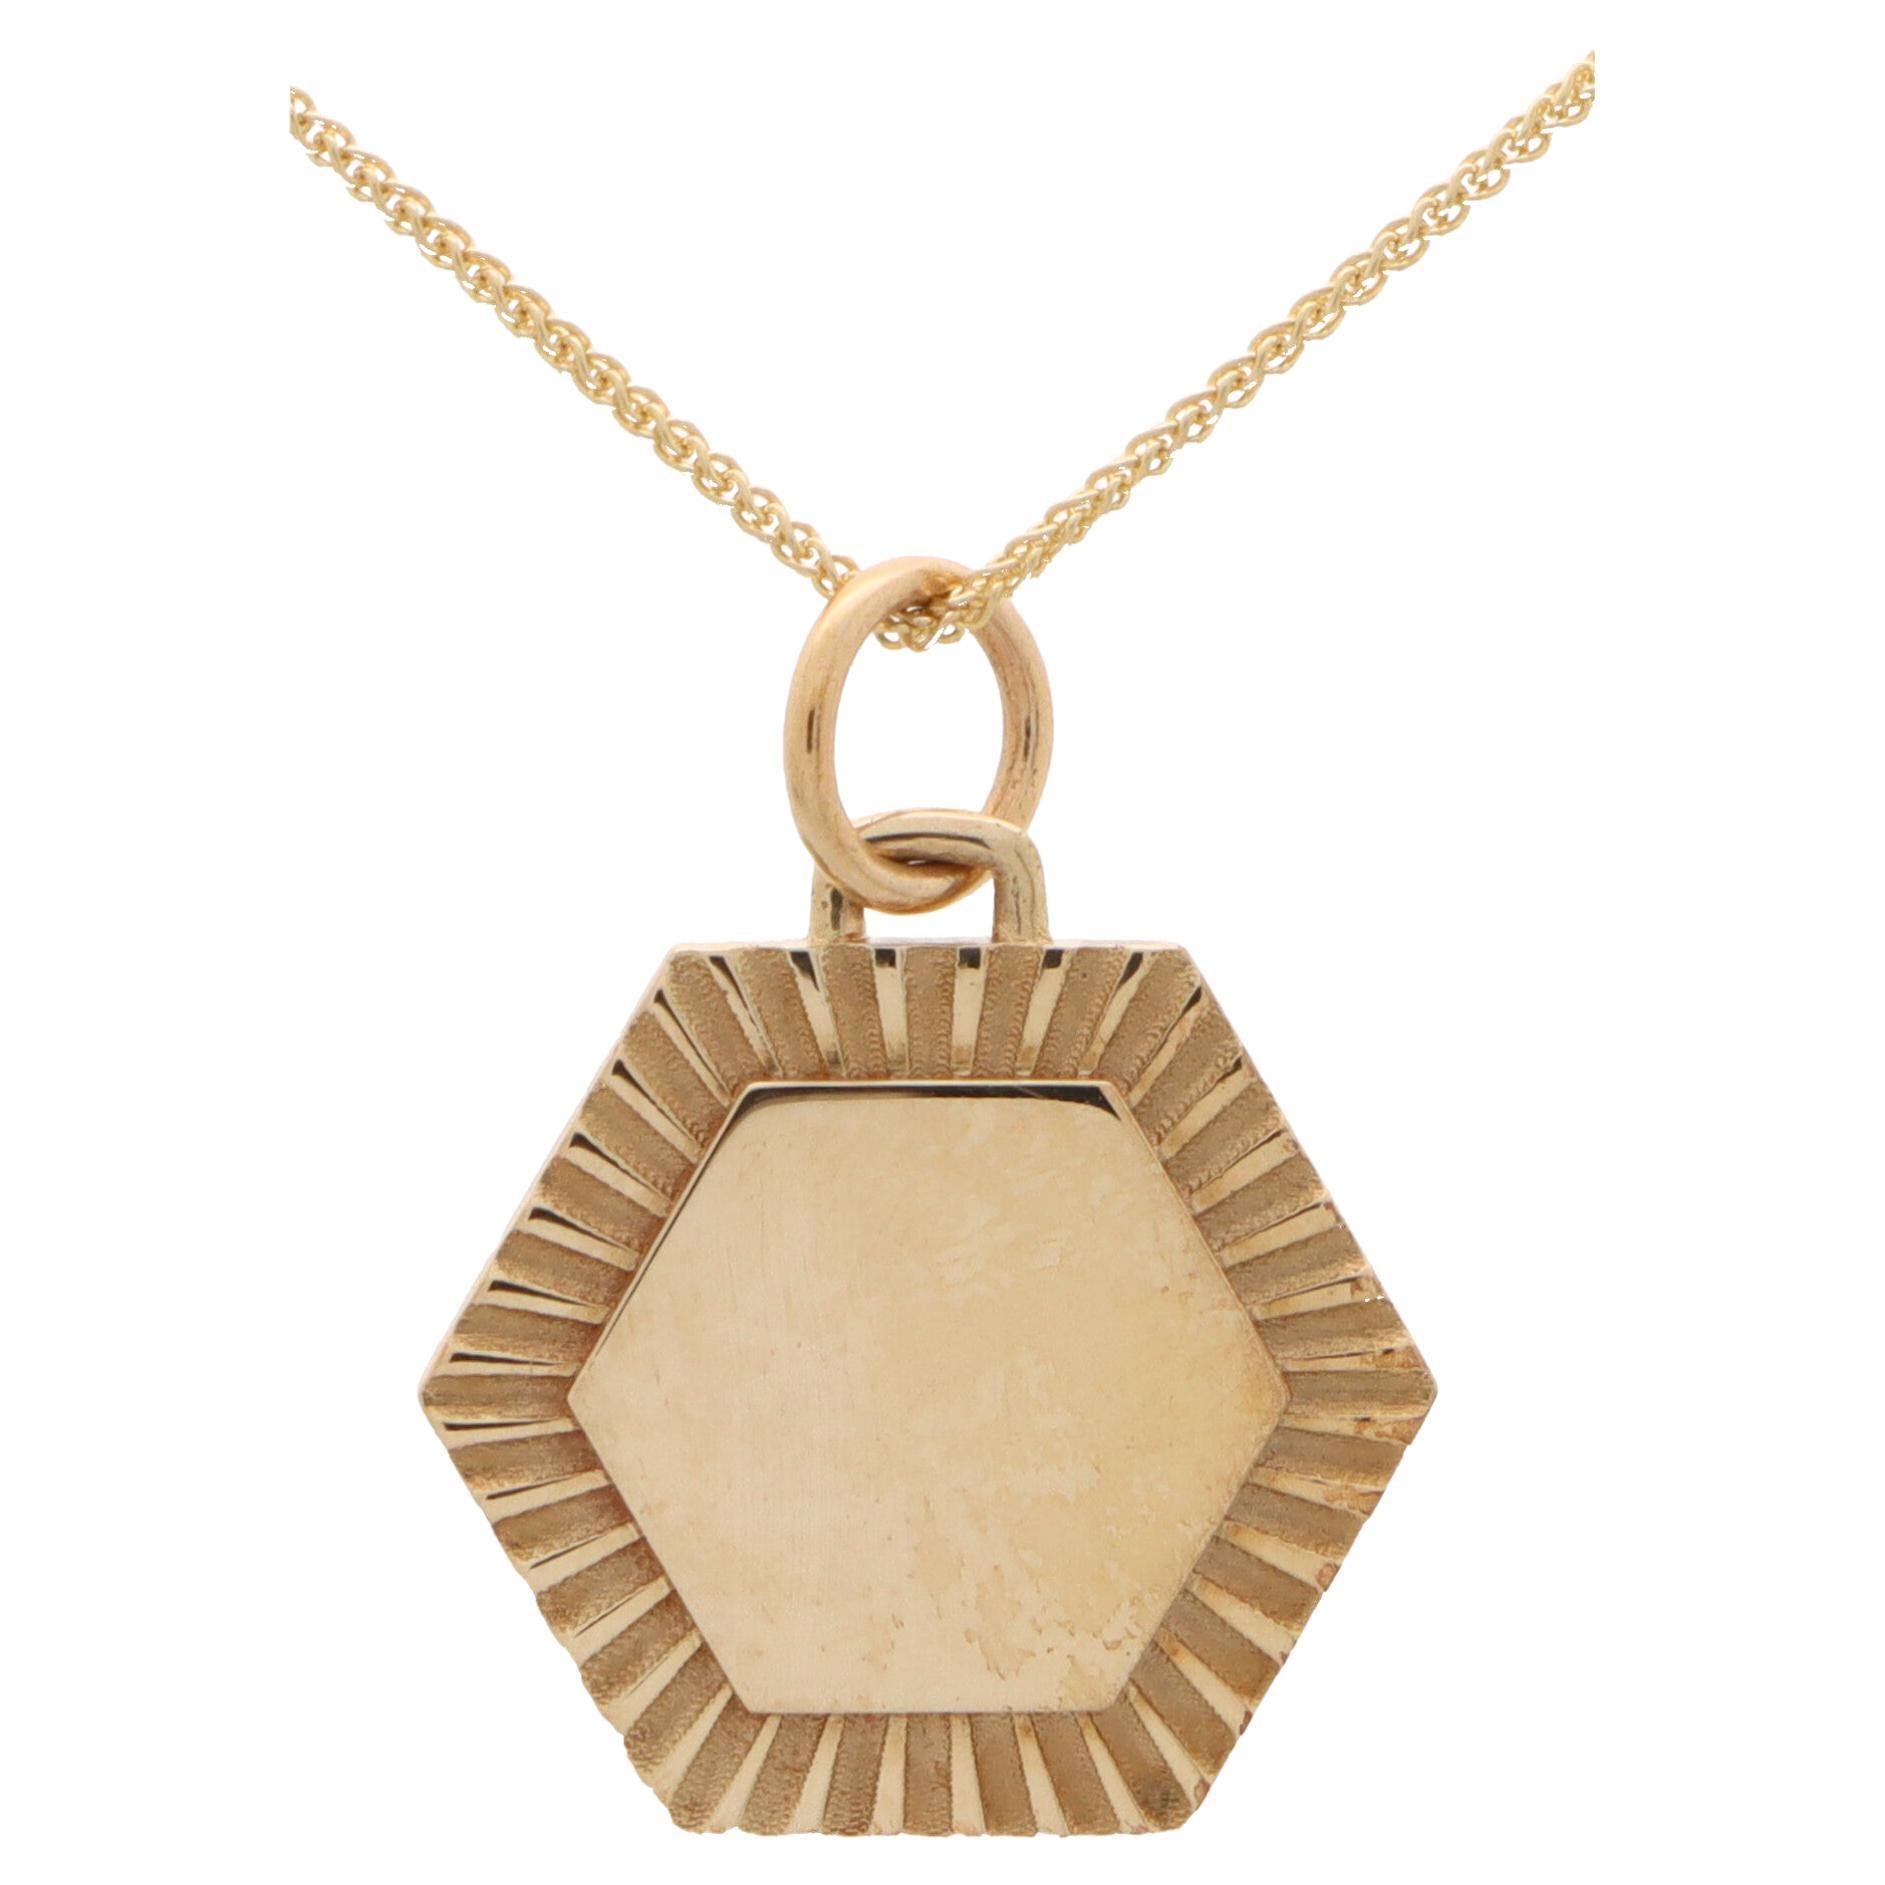 Hexagonal Coin / Disc Pendant Set in Solid 9k Gold For Sale